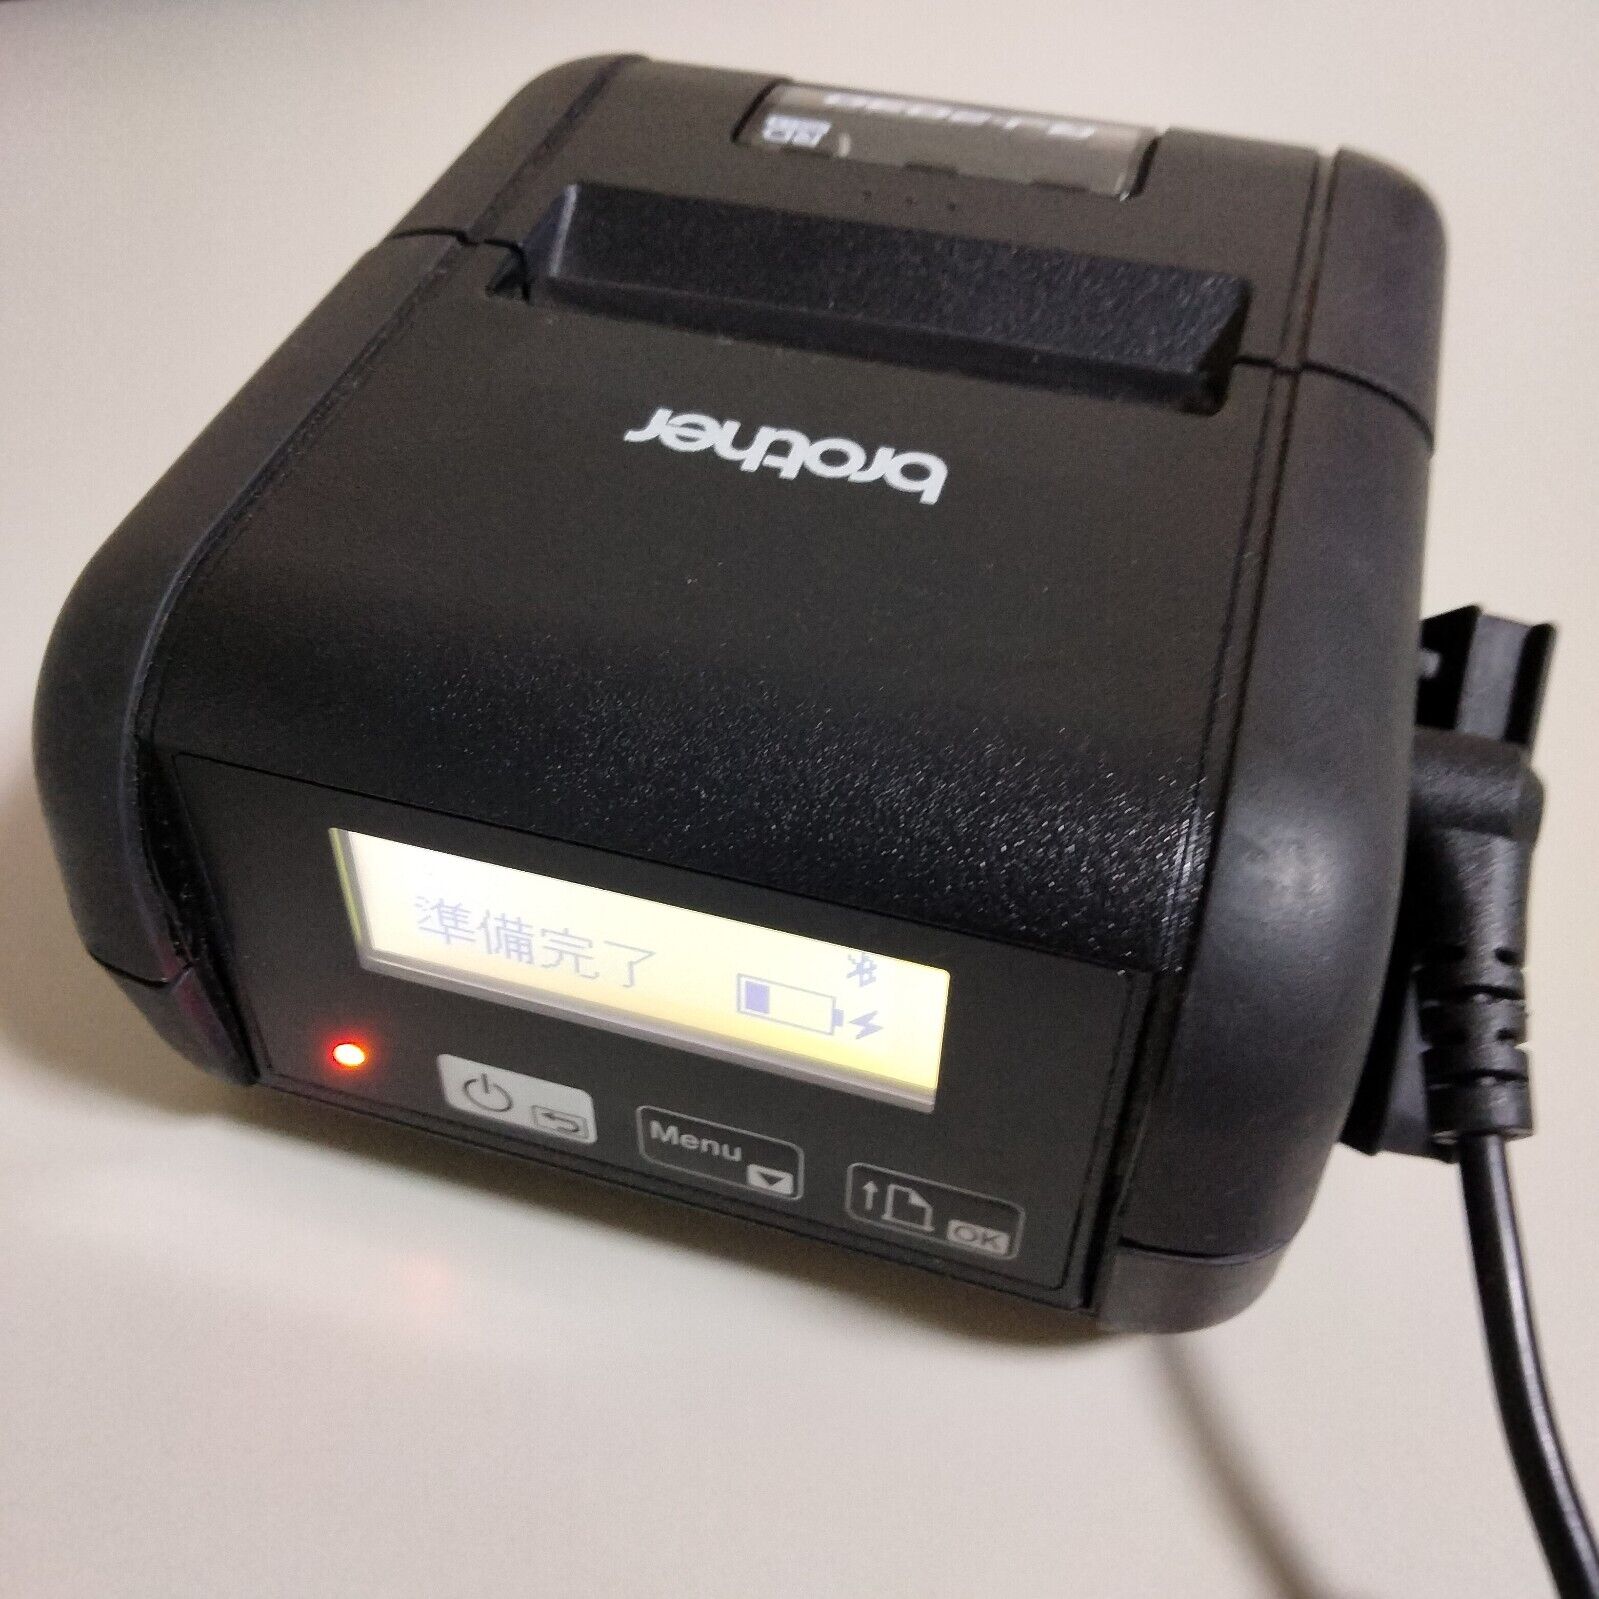 Brother RJ-2030 mobile printer from Japan